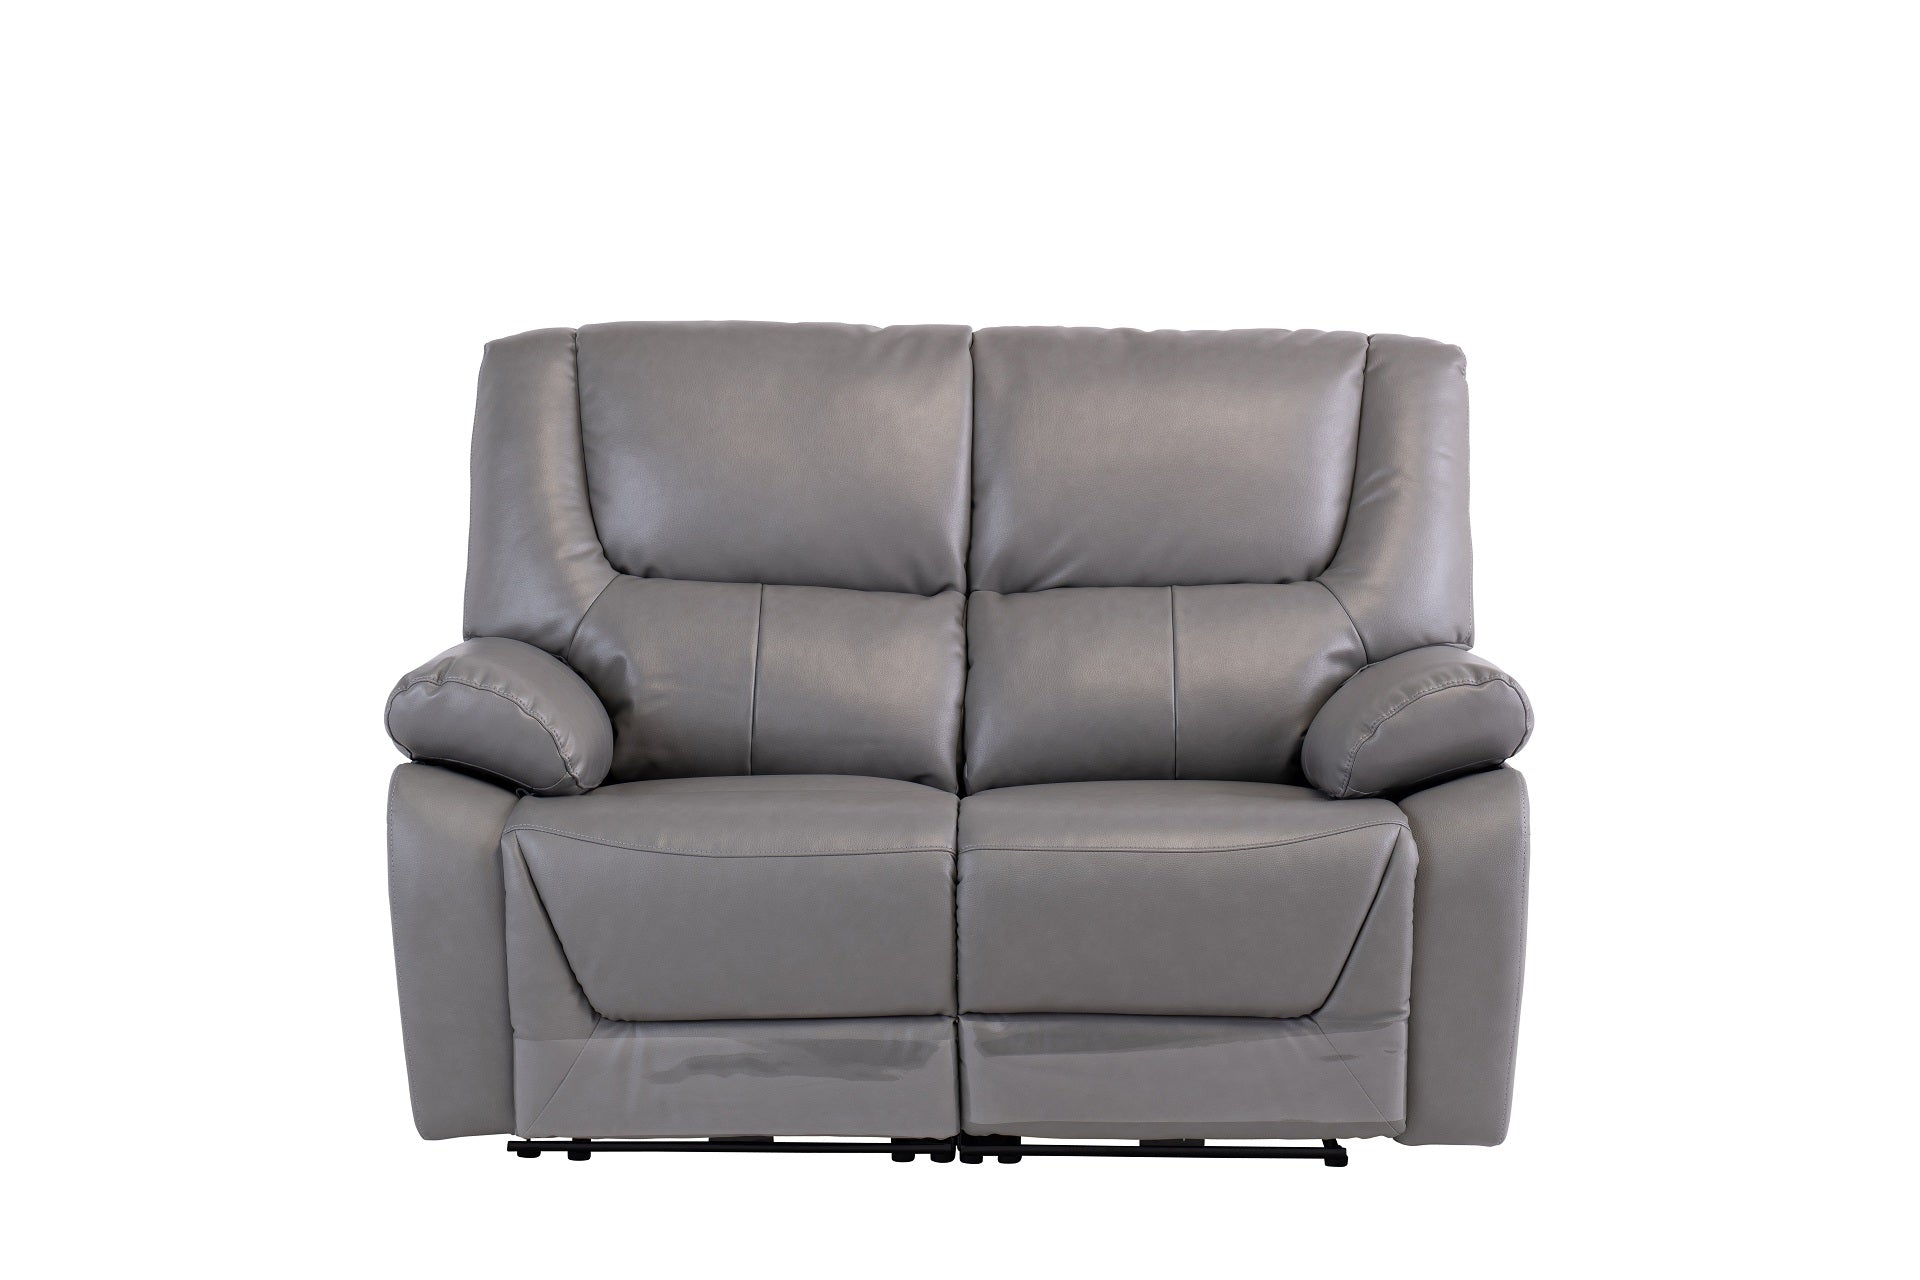 Darah Leather Electric 2 Seater Recliner - Grey